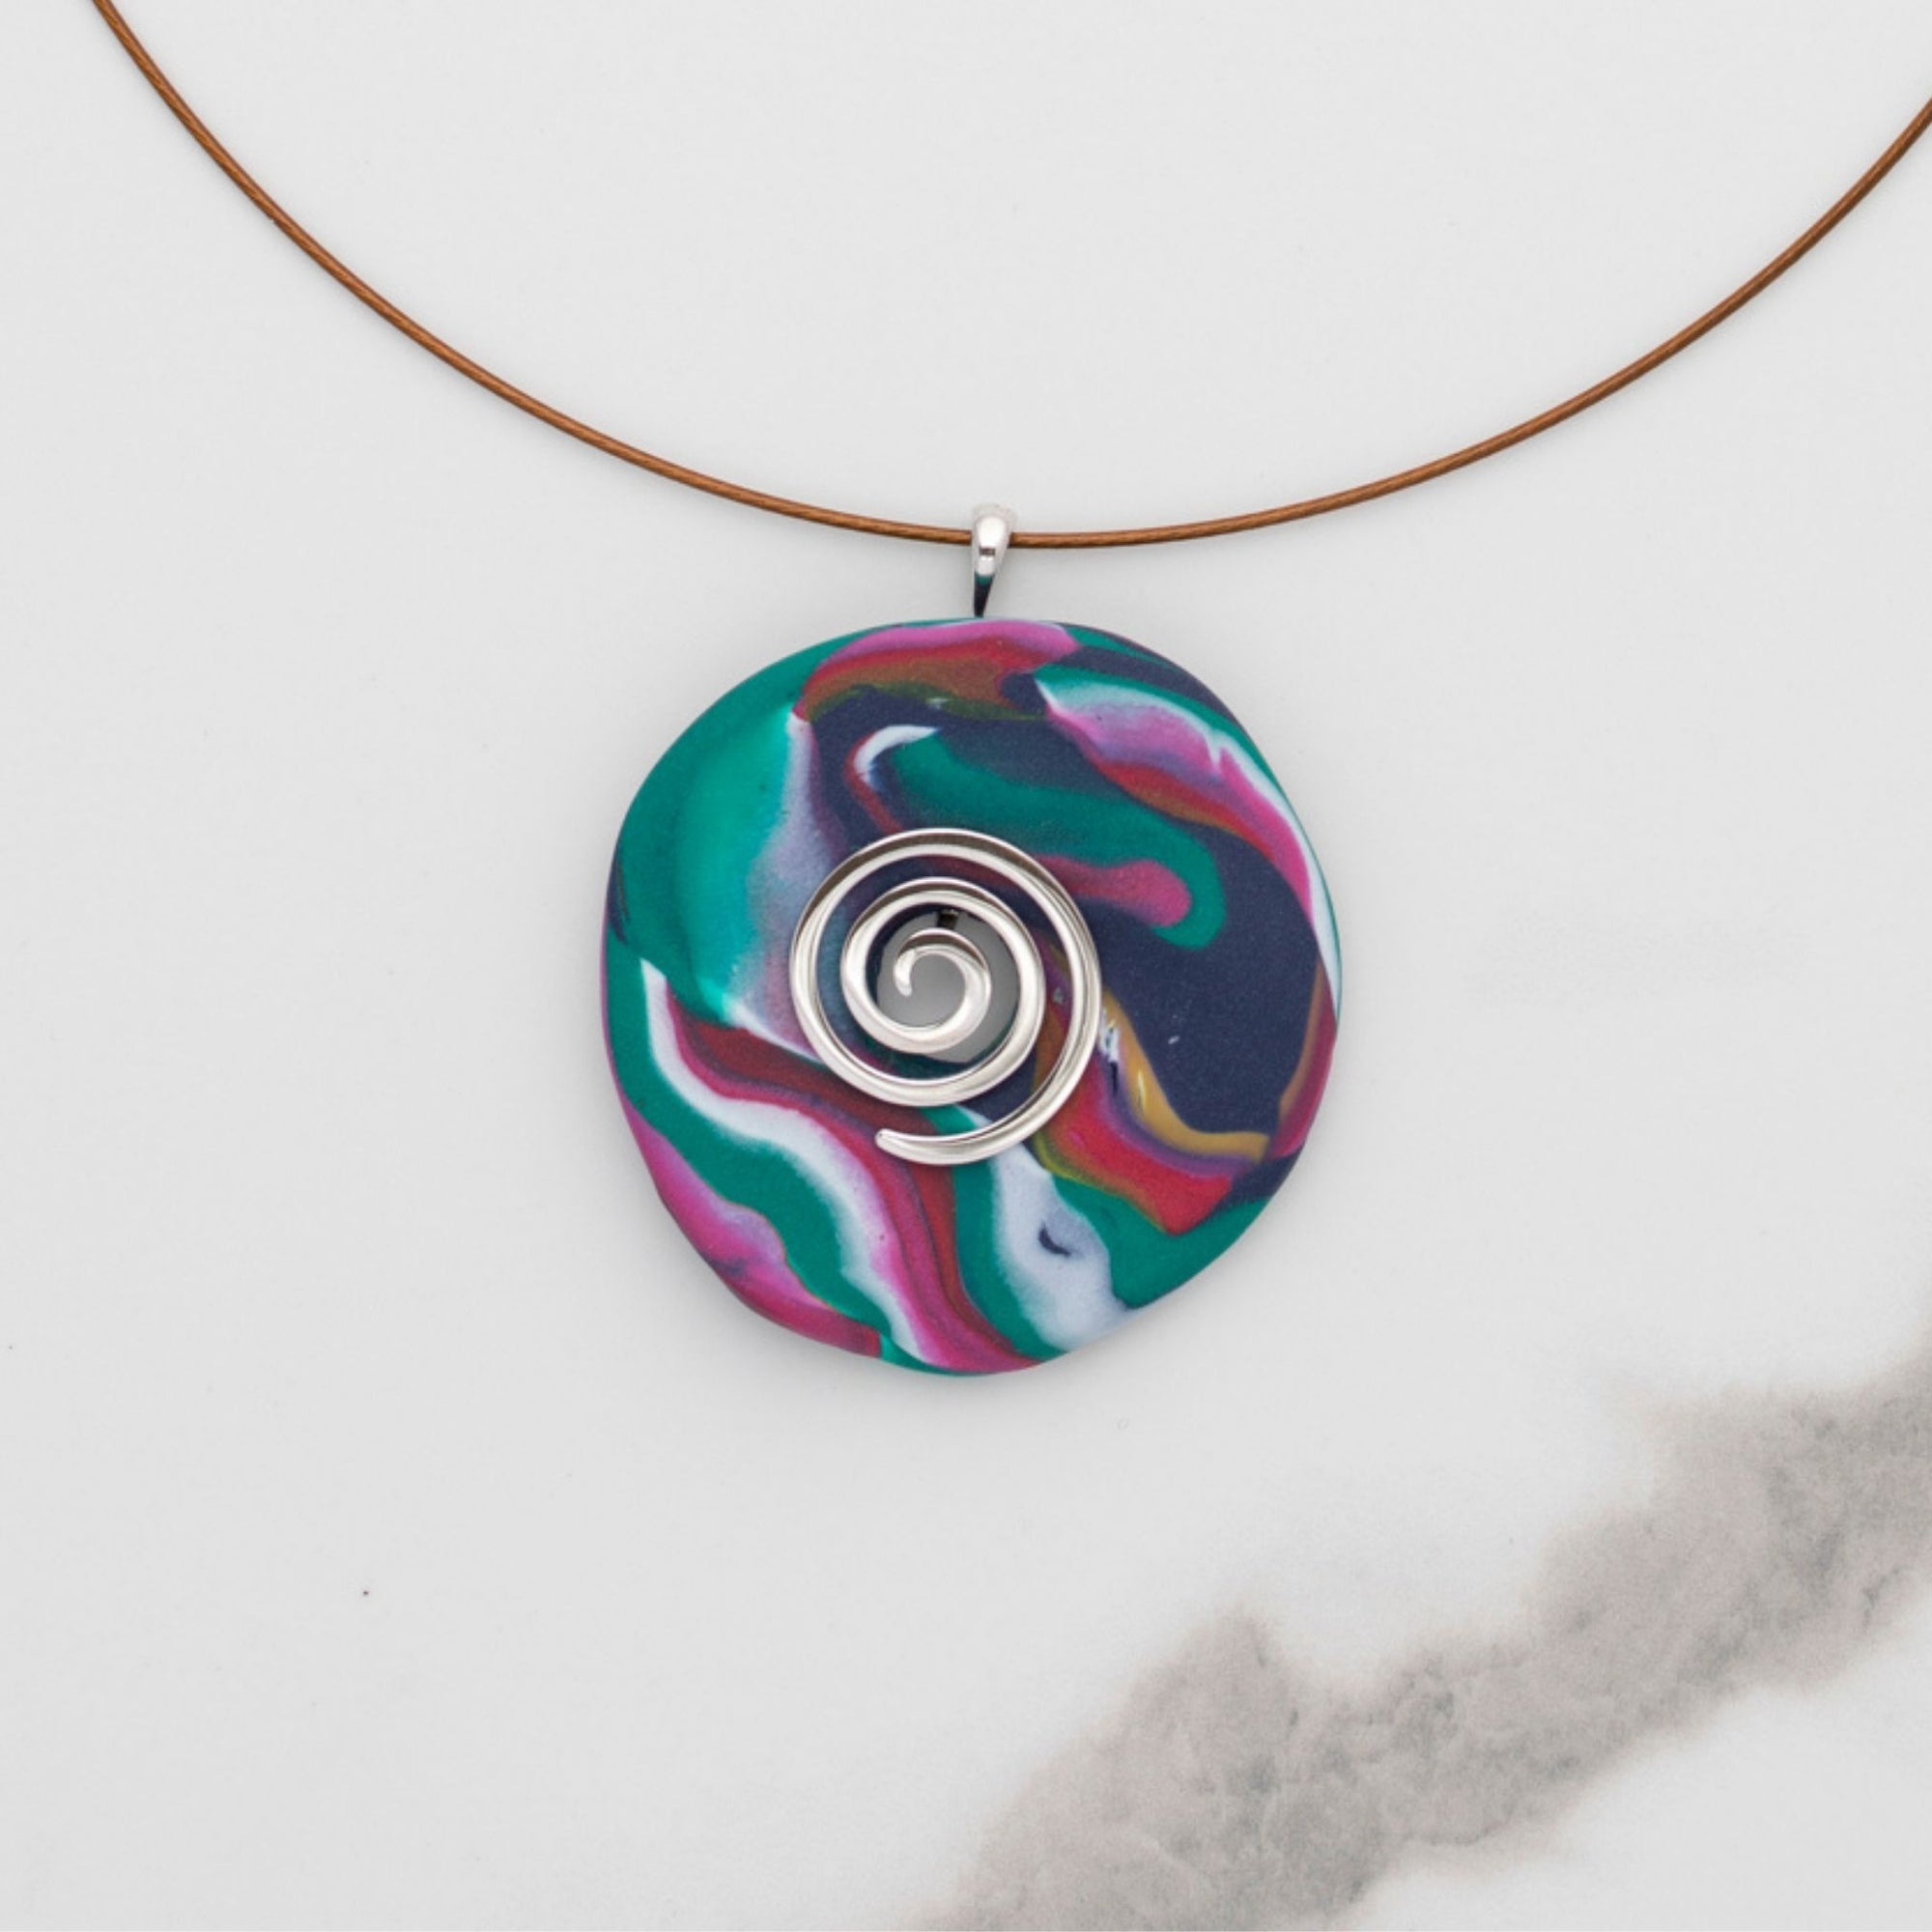 SHOP Swirl Necklace Handmade Setting by Marina-ra and 925 Sterling Silver Swirl